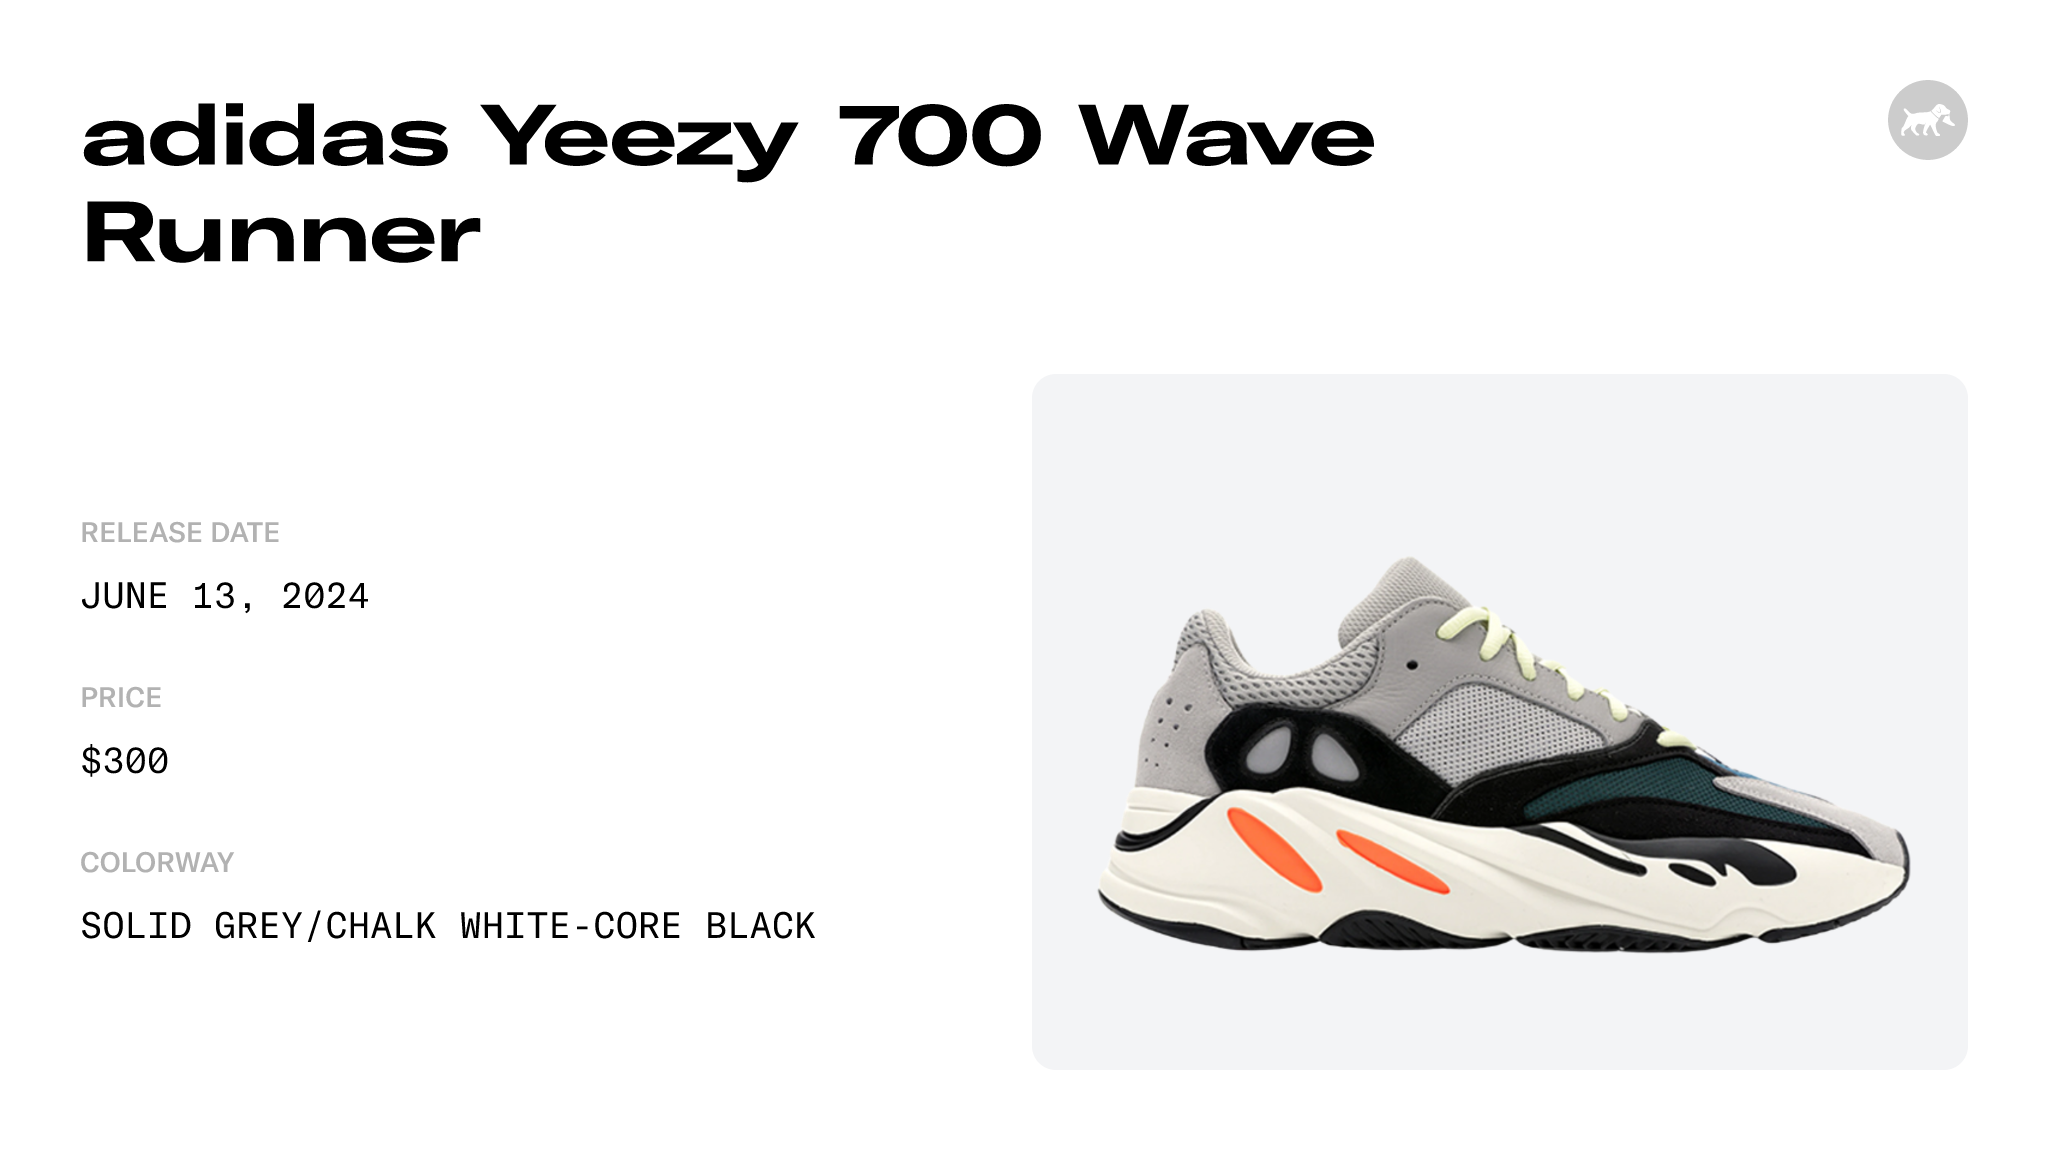 adidas Yeezy 700 Wave Runner - B75571 Raffles and Release Date